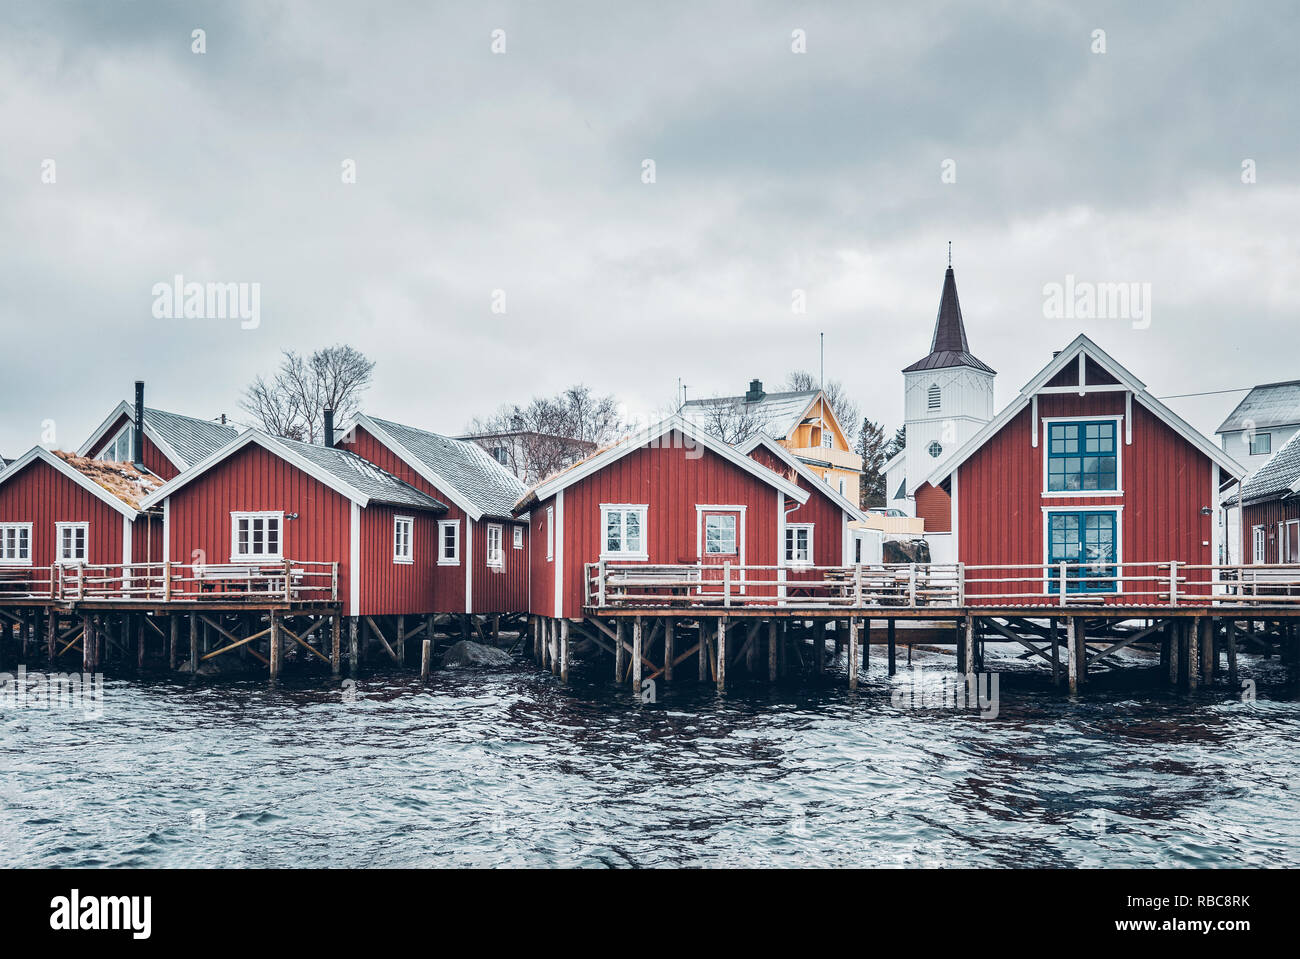 Traditional red rorbu houses in Reine, Norway Stock Photo